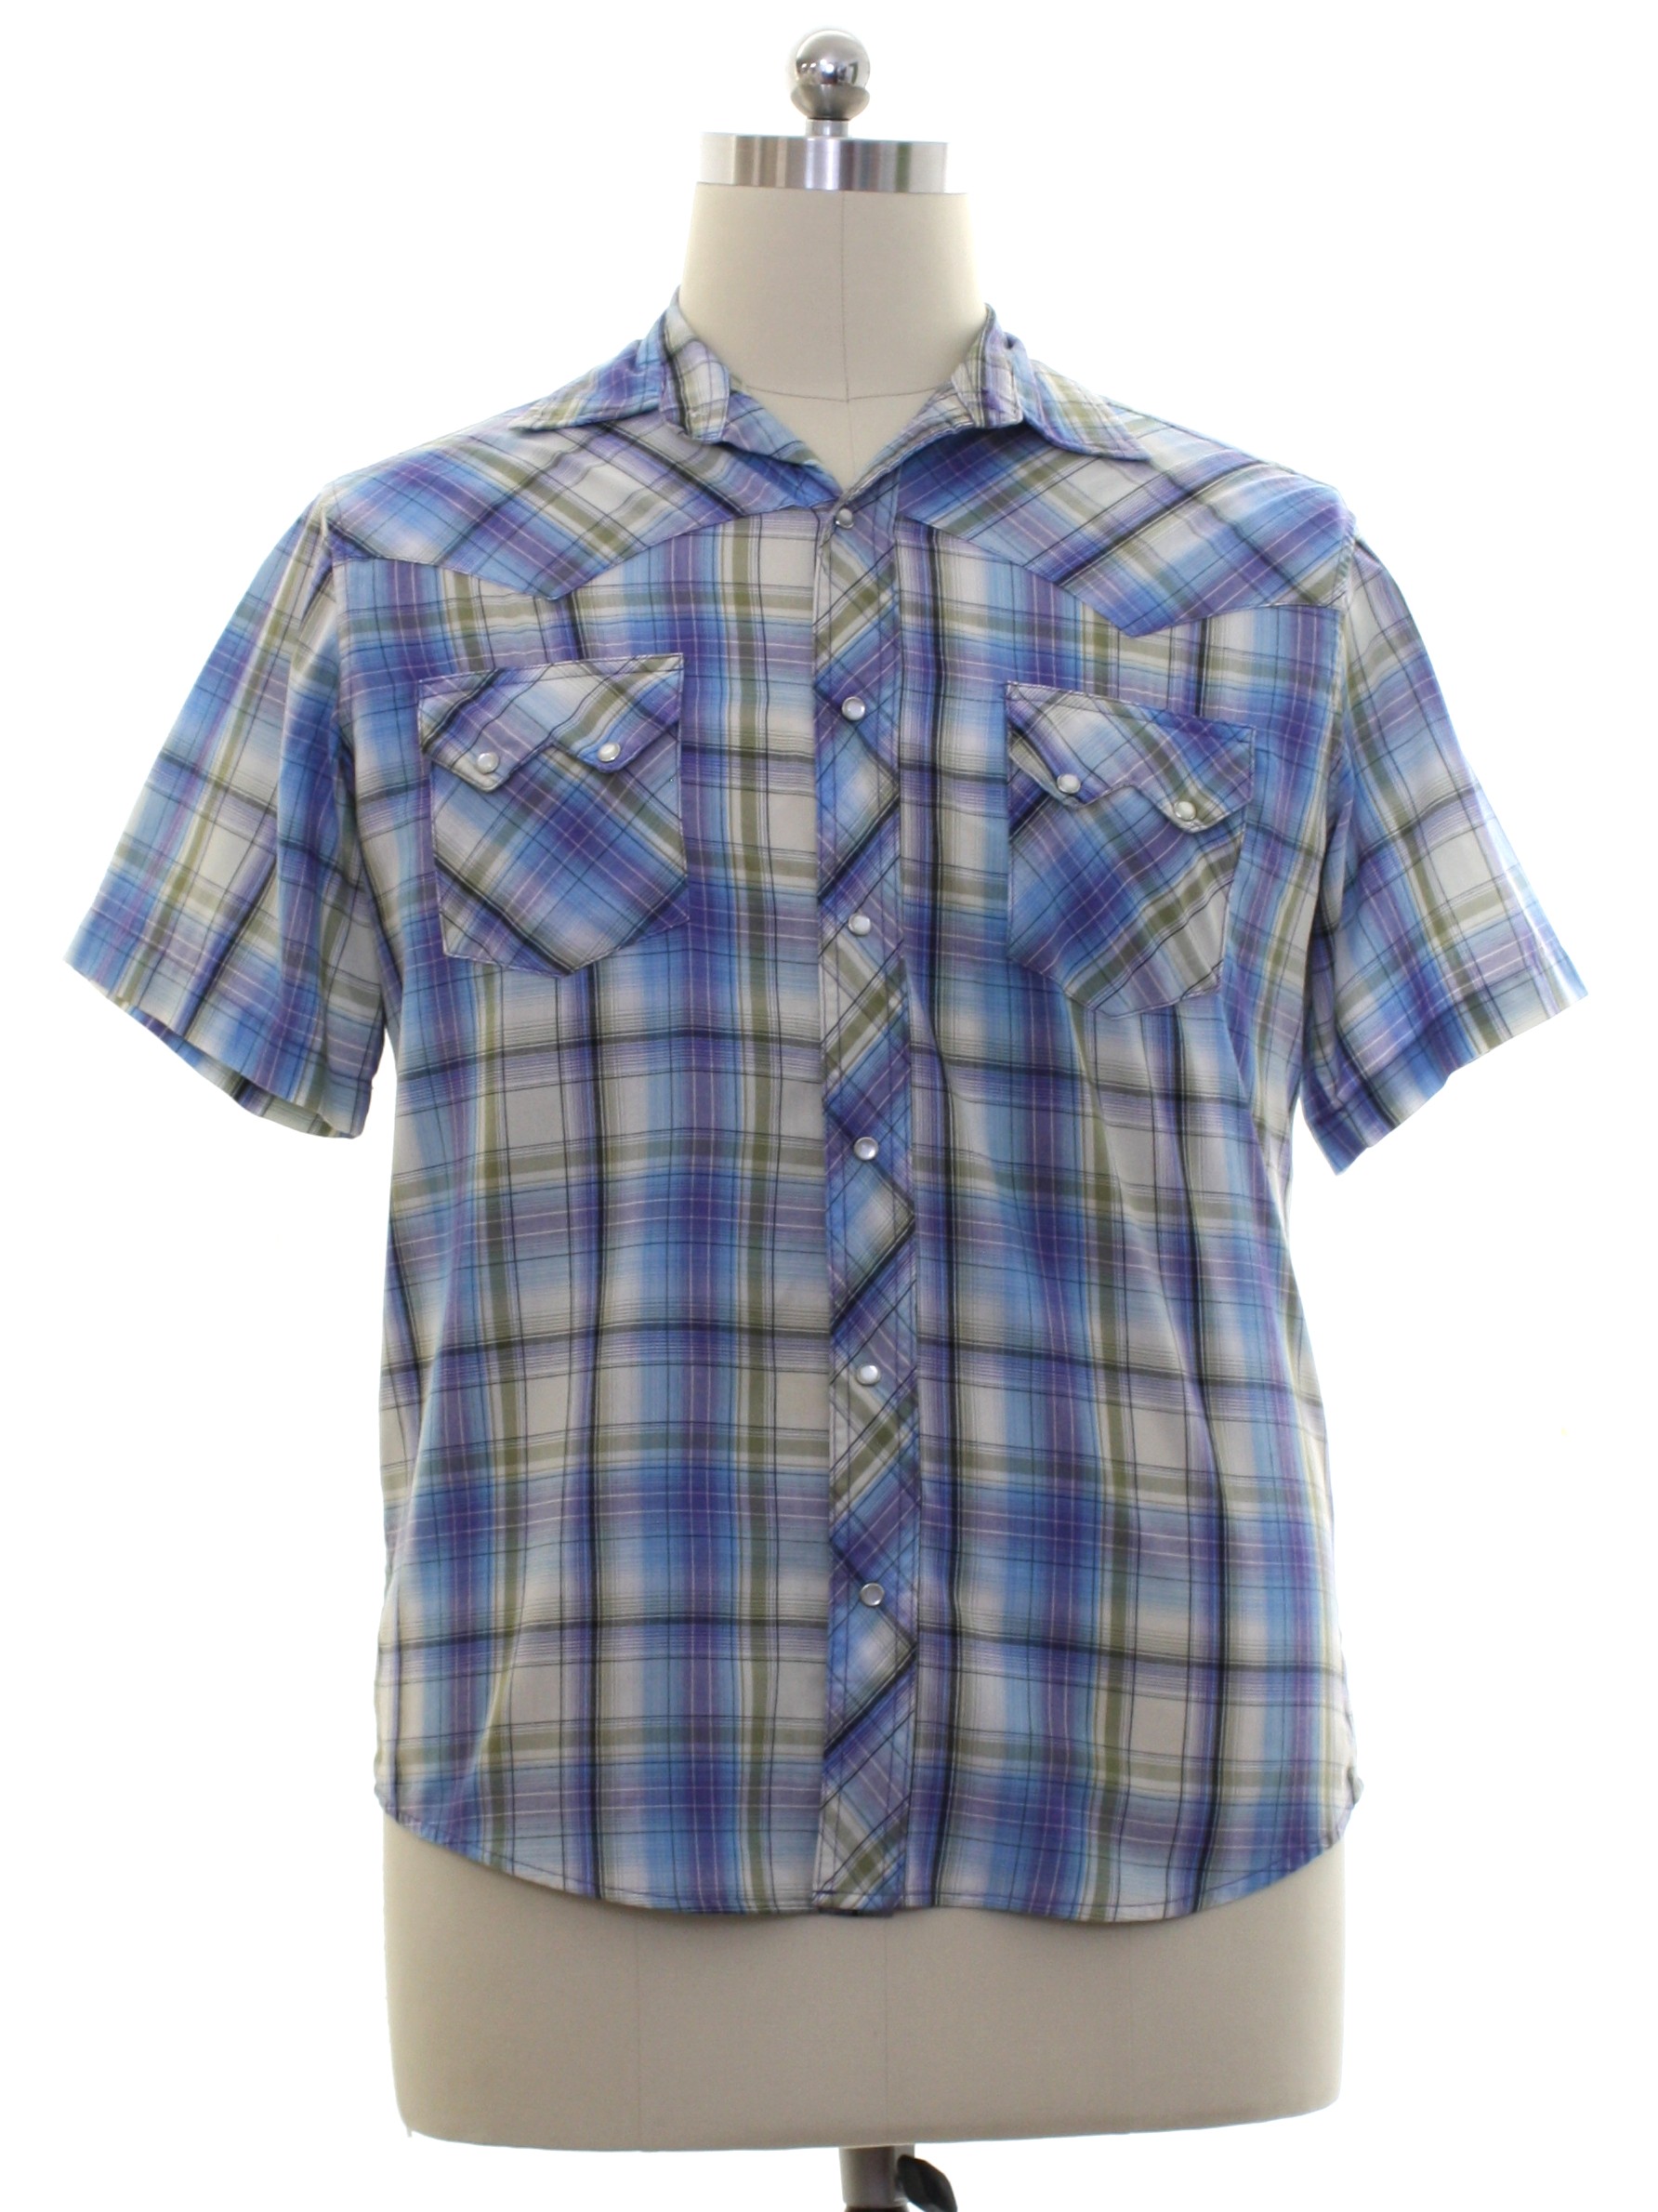 90s Vintage Wrangler Western Shirt: 90s or newer -Wrangler- Mens blue,  ivory, moss green, and sky blue plaid background polyester cotton blend  short sleeve western shirt. pearlized snaps at front placket and